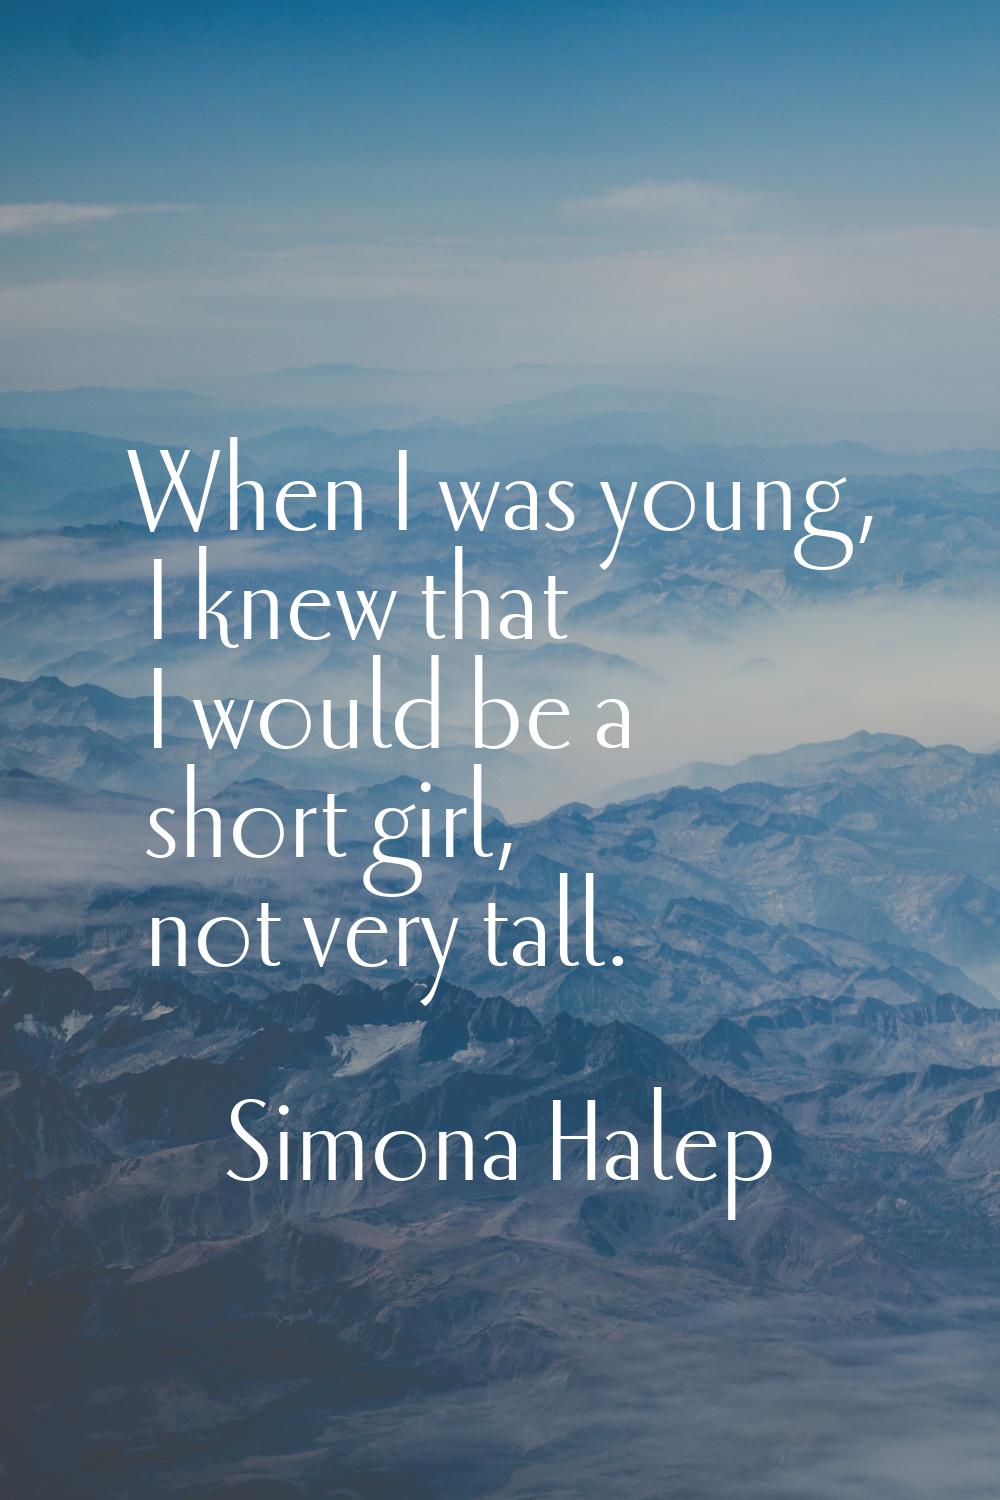 When I was young, I knew that I would be a short girl, not very tall.